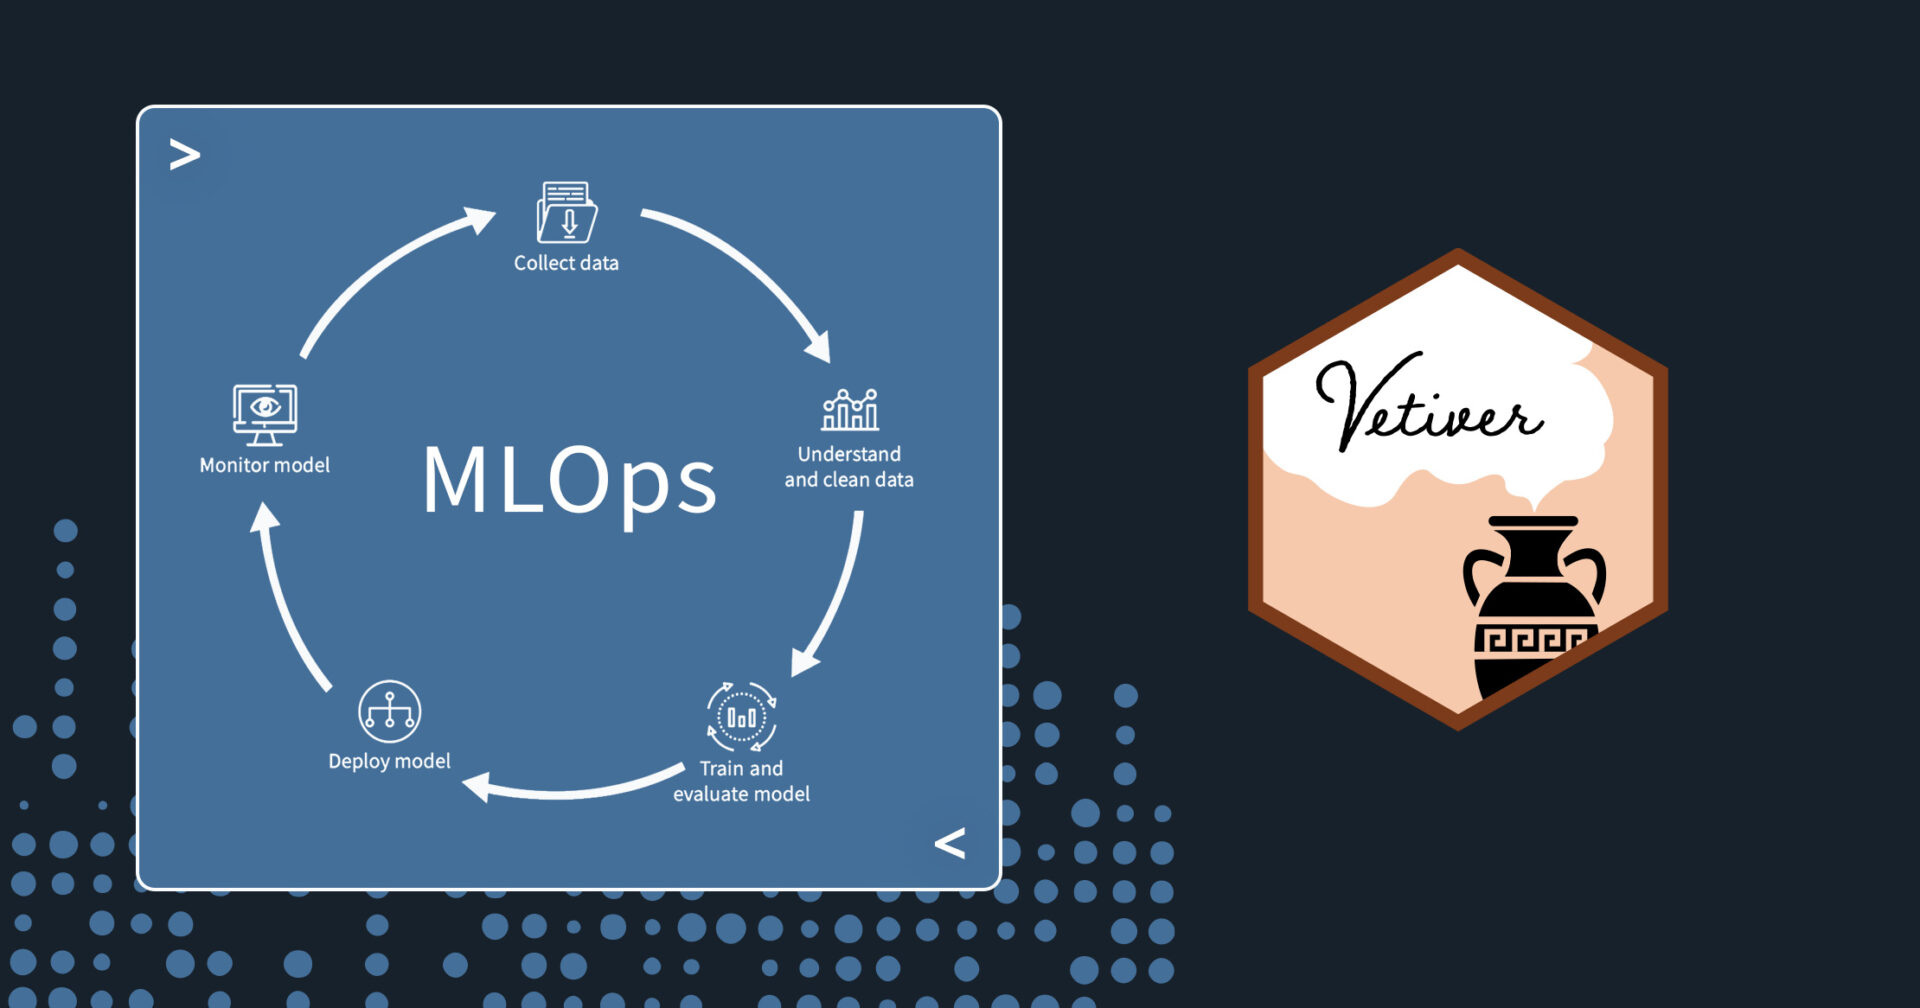 On the left, the cycle of MLOps consisting of Collecting data, Understanding and cleaning data, training and evaluating model, deploying model, and monitoring model. On the right, the vetiver package hex sticker.